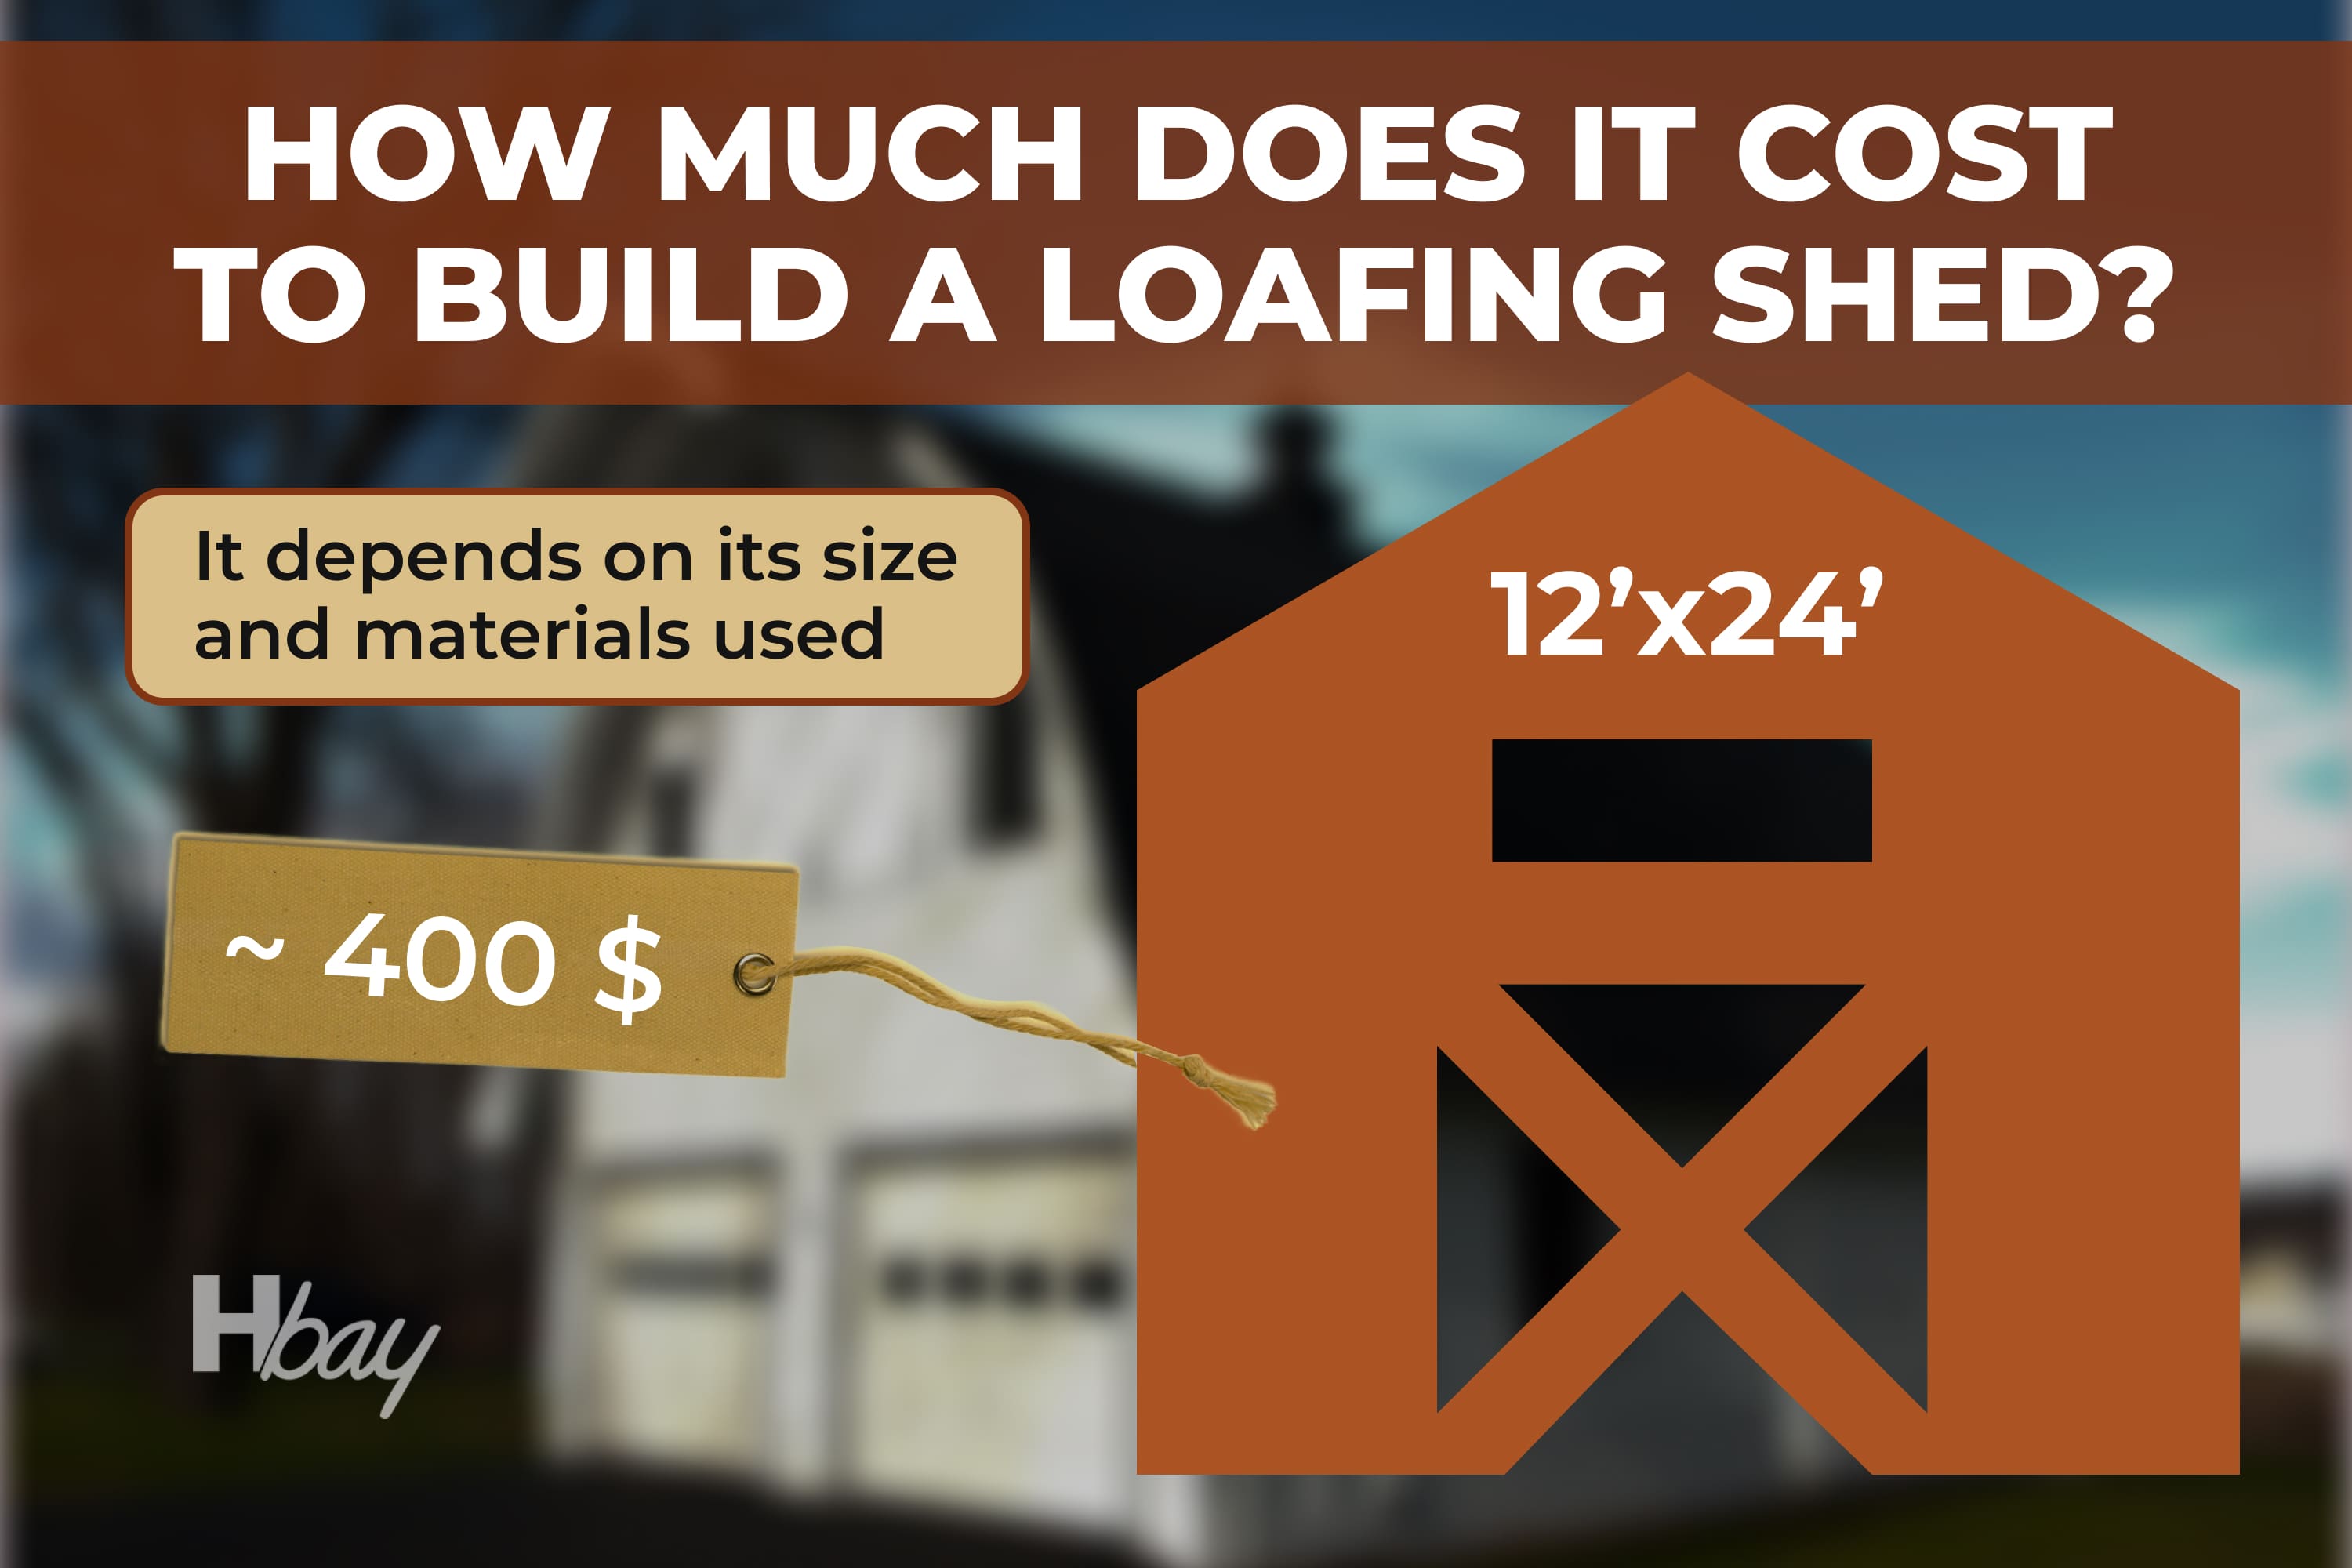 How much does it cost to build a loafing shed